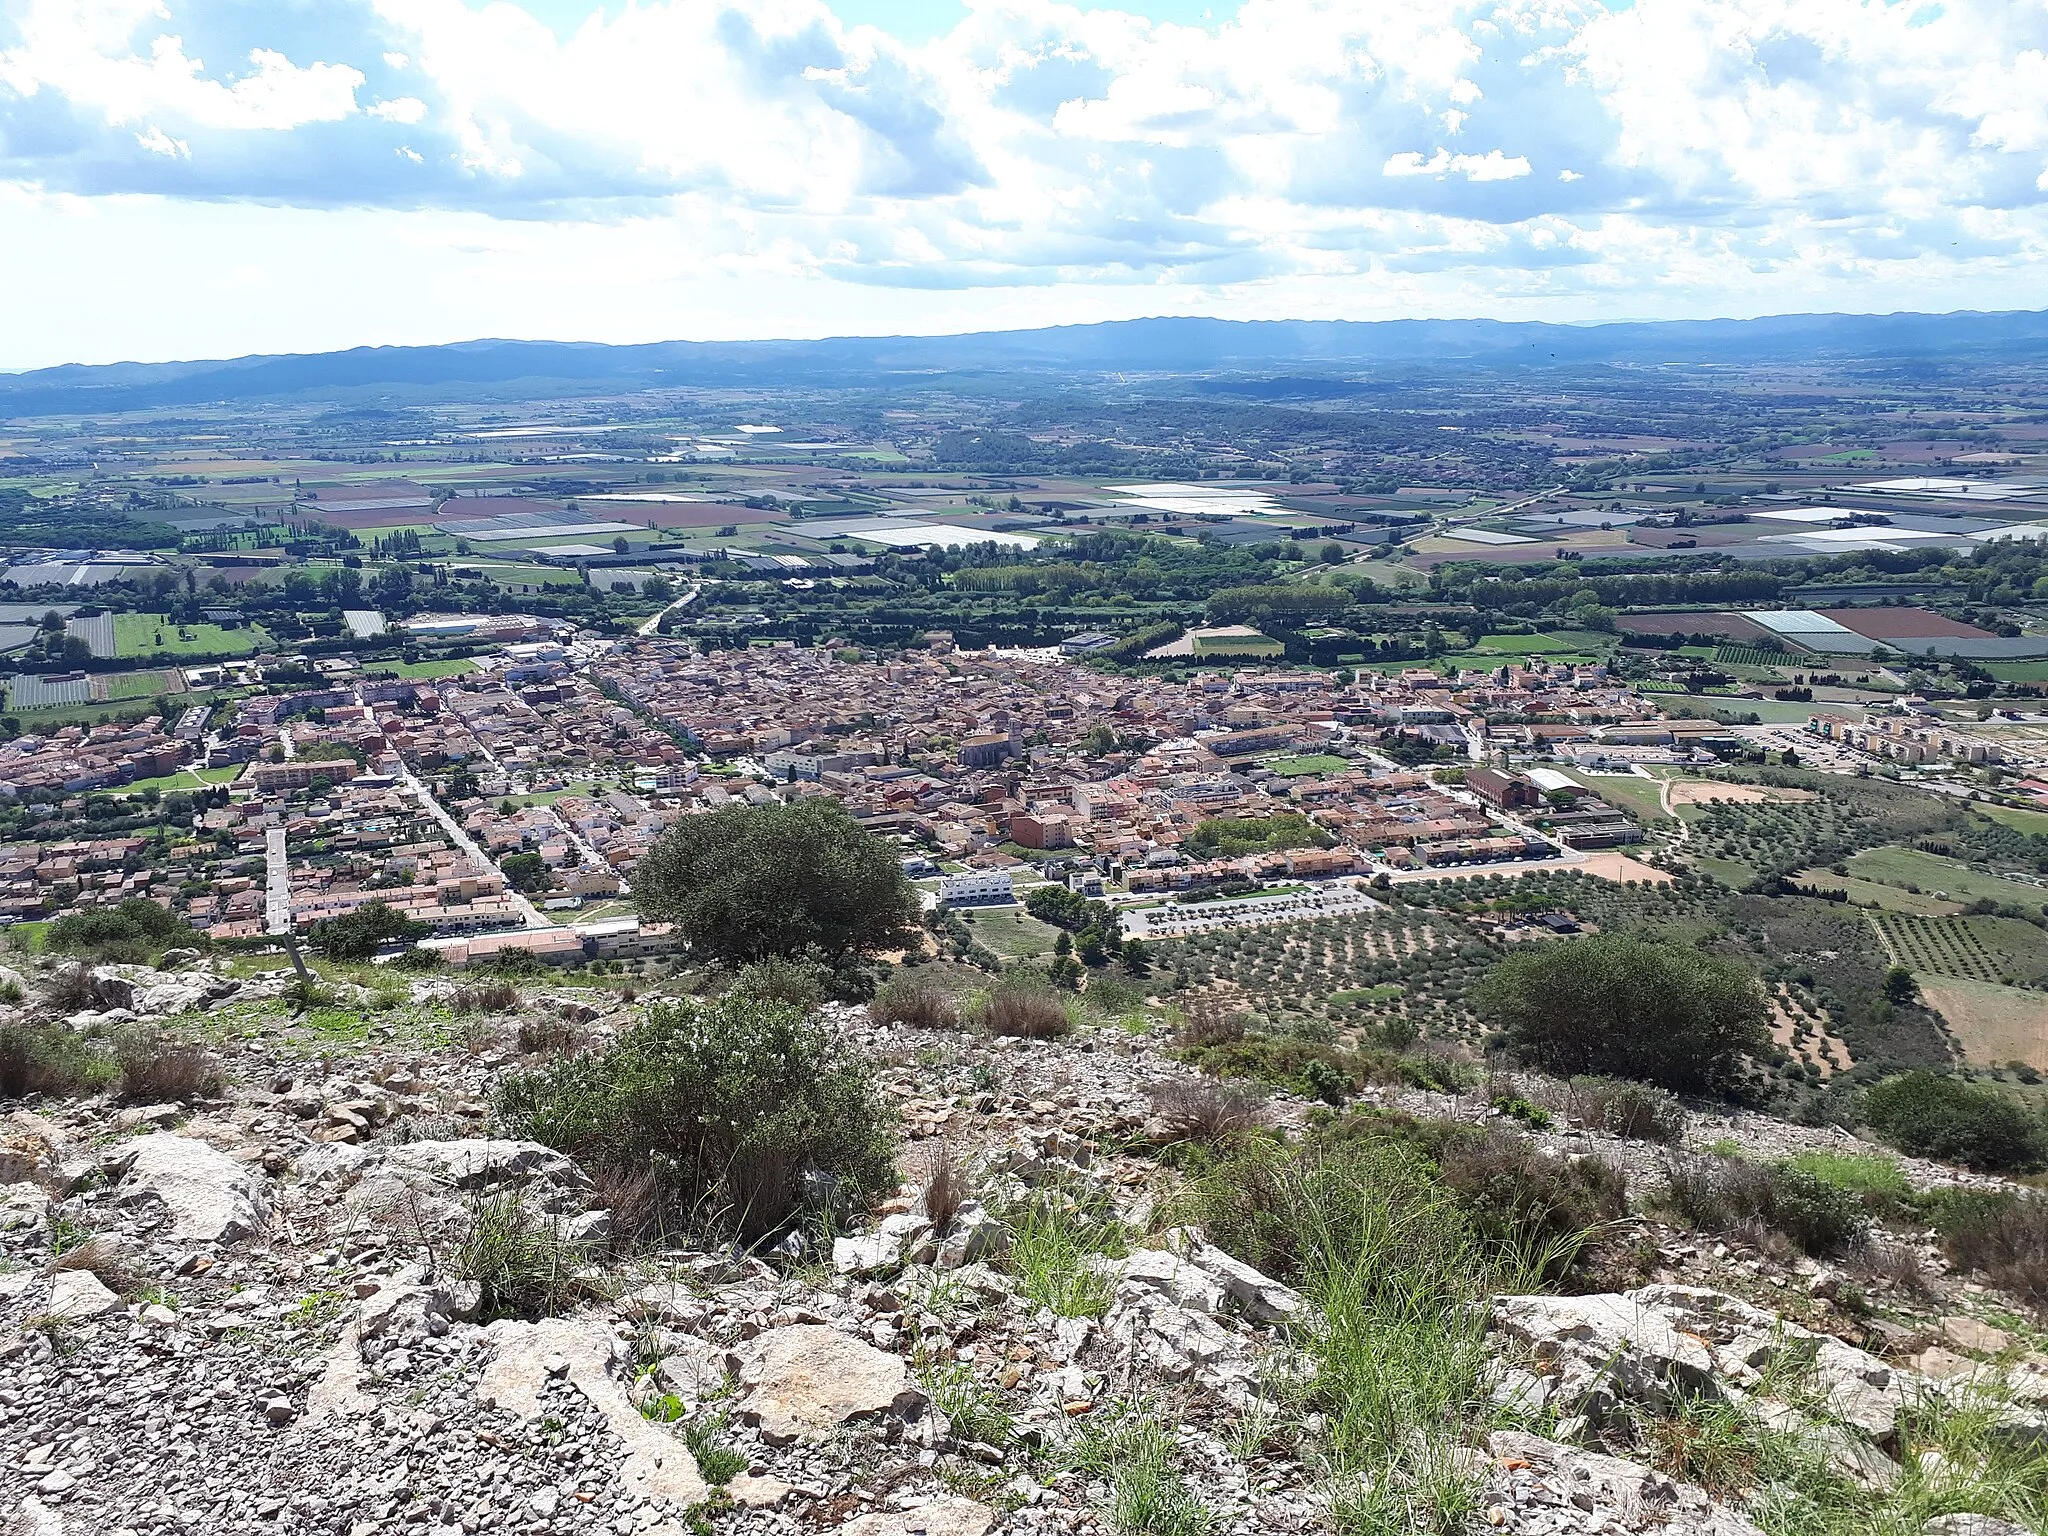 Photo showing: The town lies in the valley of the Ter river.
See: File:Ter - Baix Empordà.jpg.